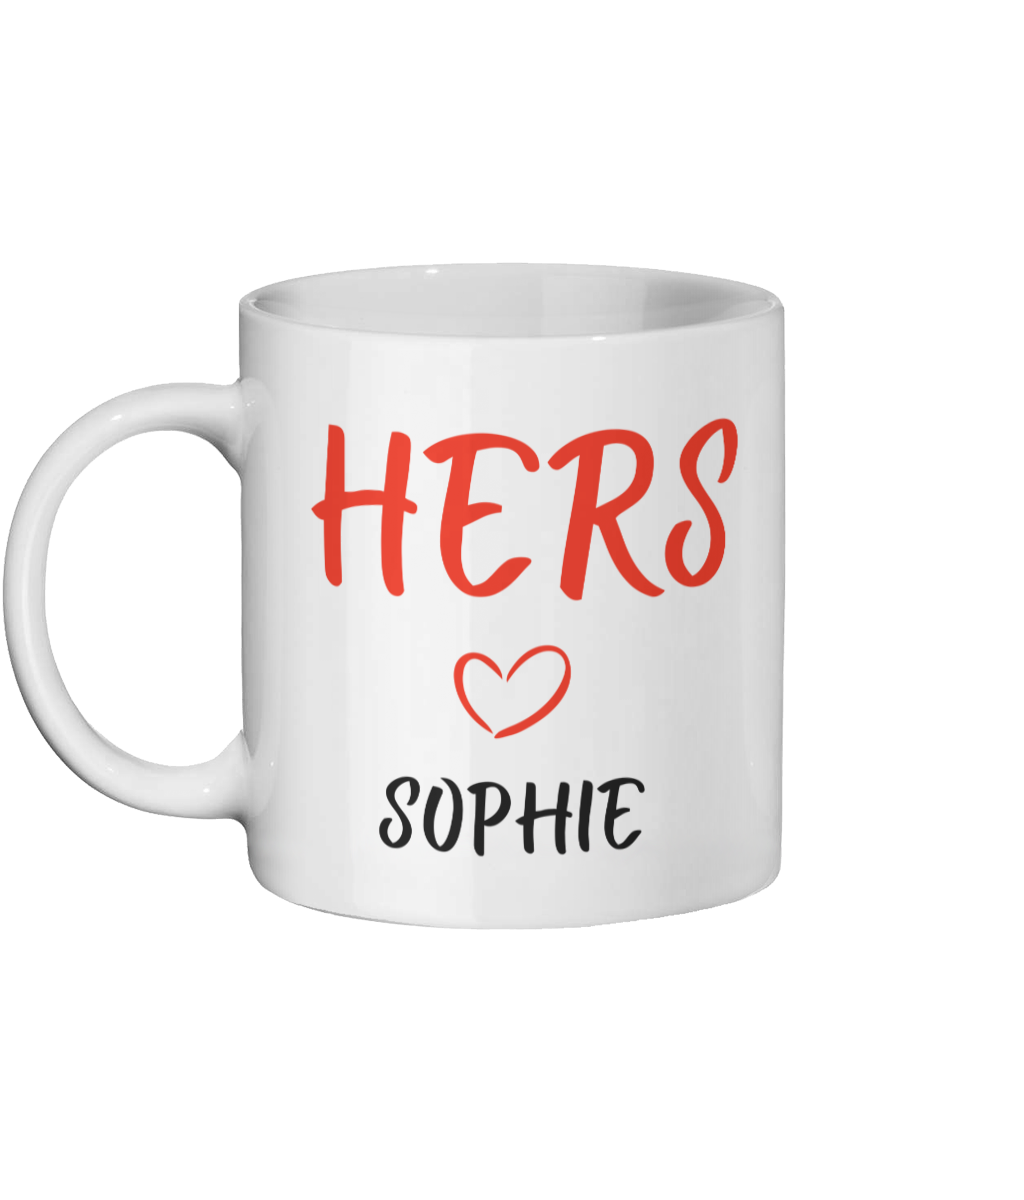 Set of 2 Personalised Hers His Mugs with Names, Valentine's Day Gift